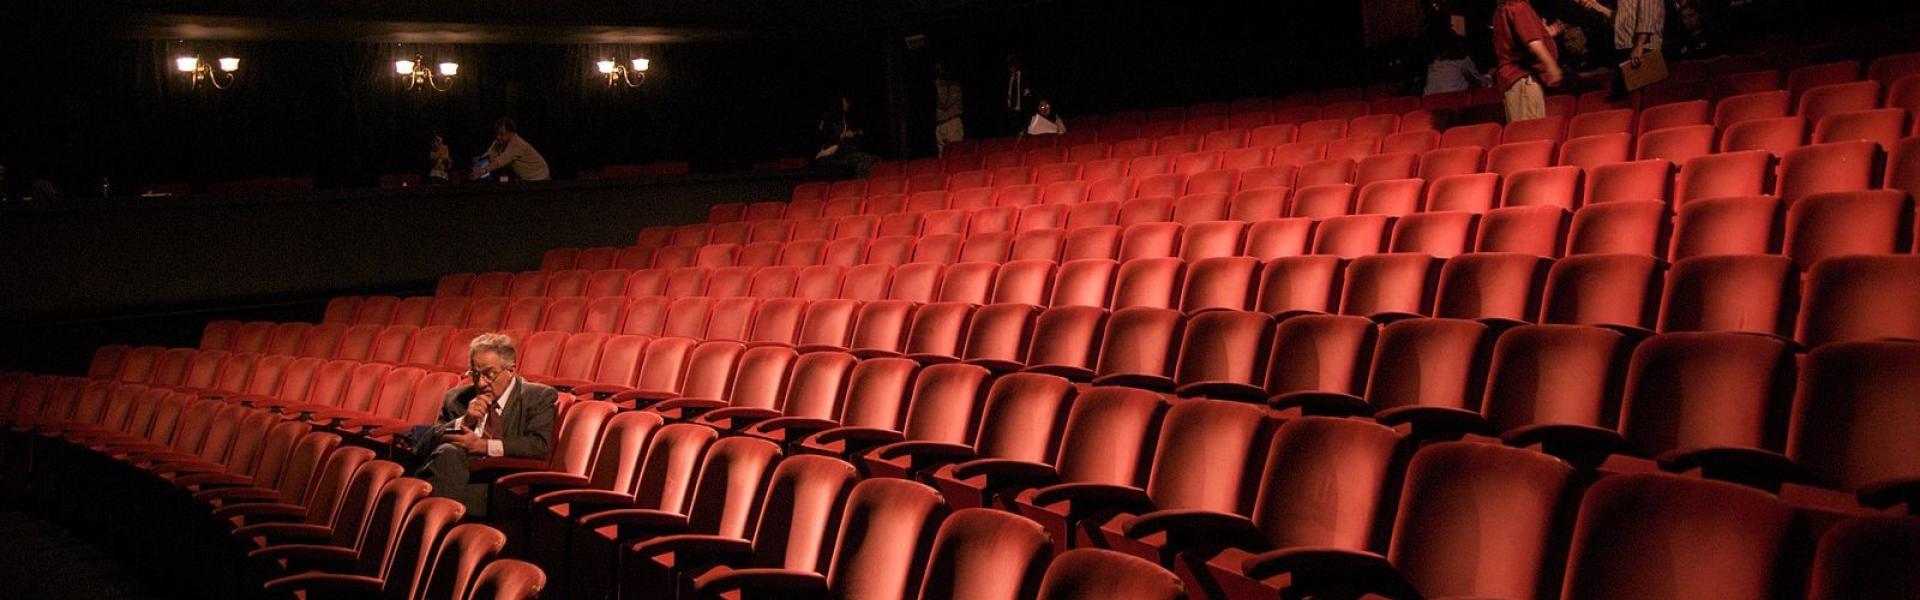 Watching Movies in a Theater Can Count as a 'Light Workout,' Study Finds |  Complex